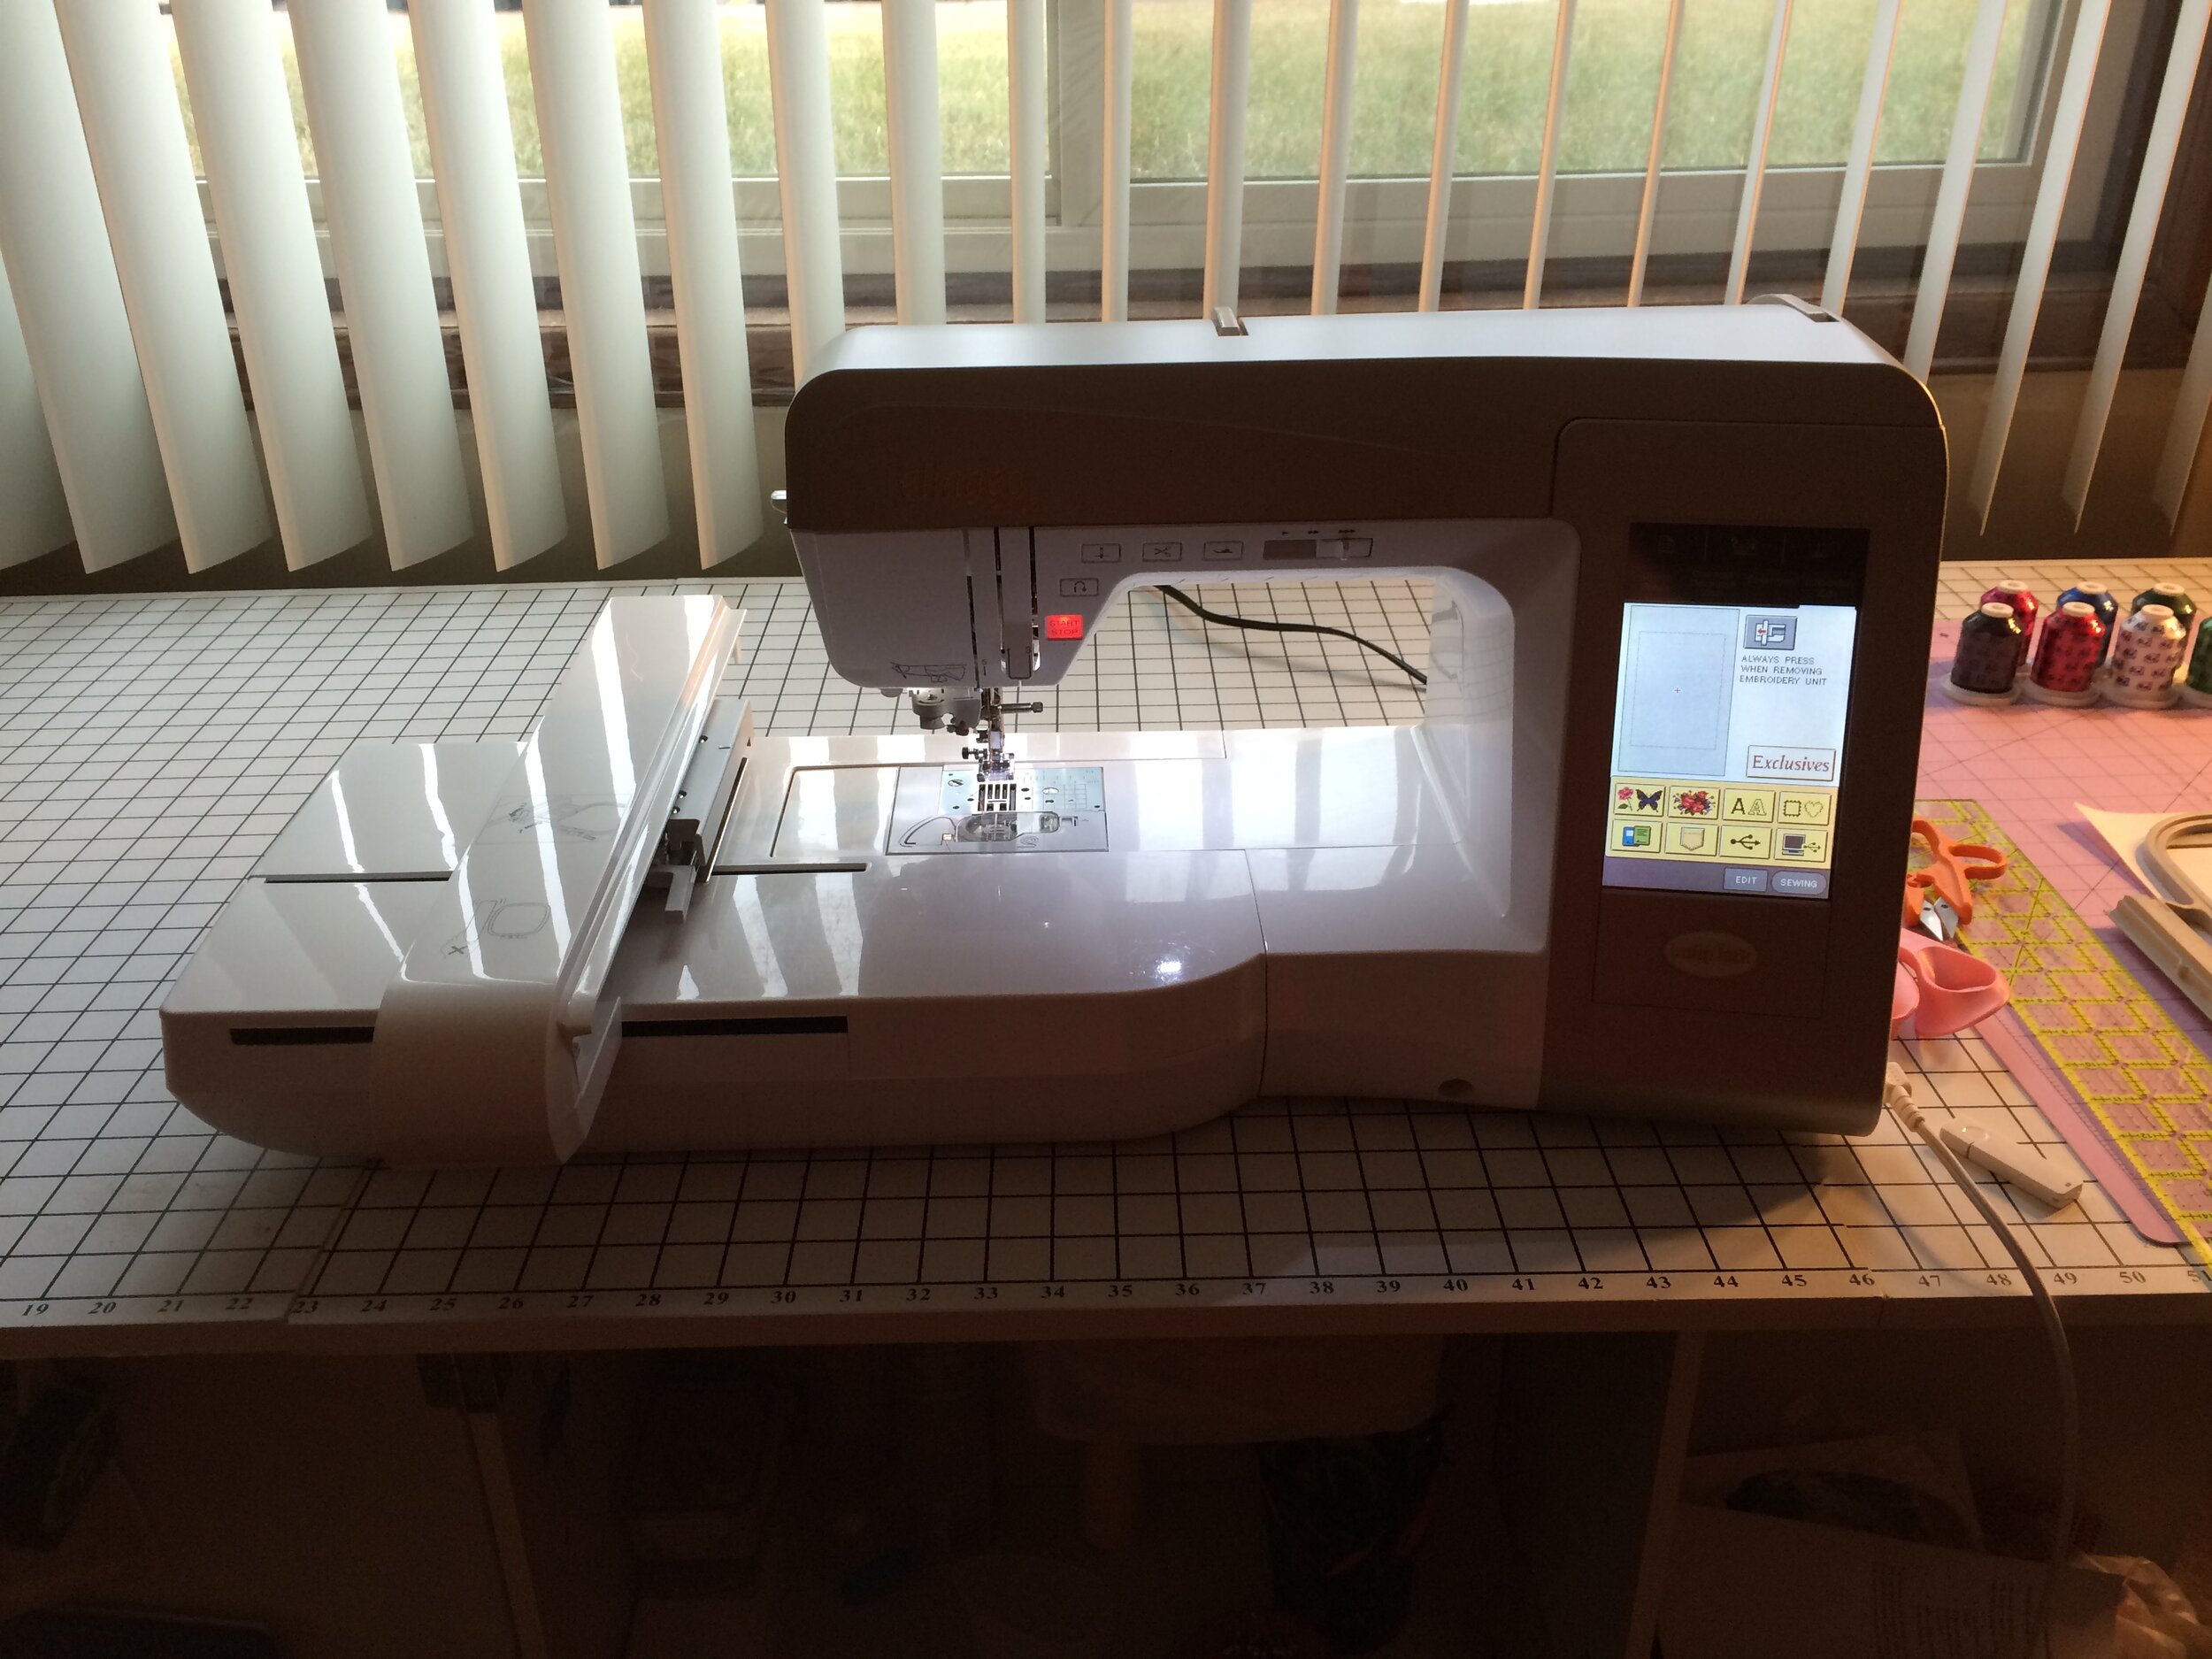 Babylock Esante Sewing & Embroidery Machine